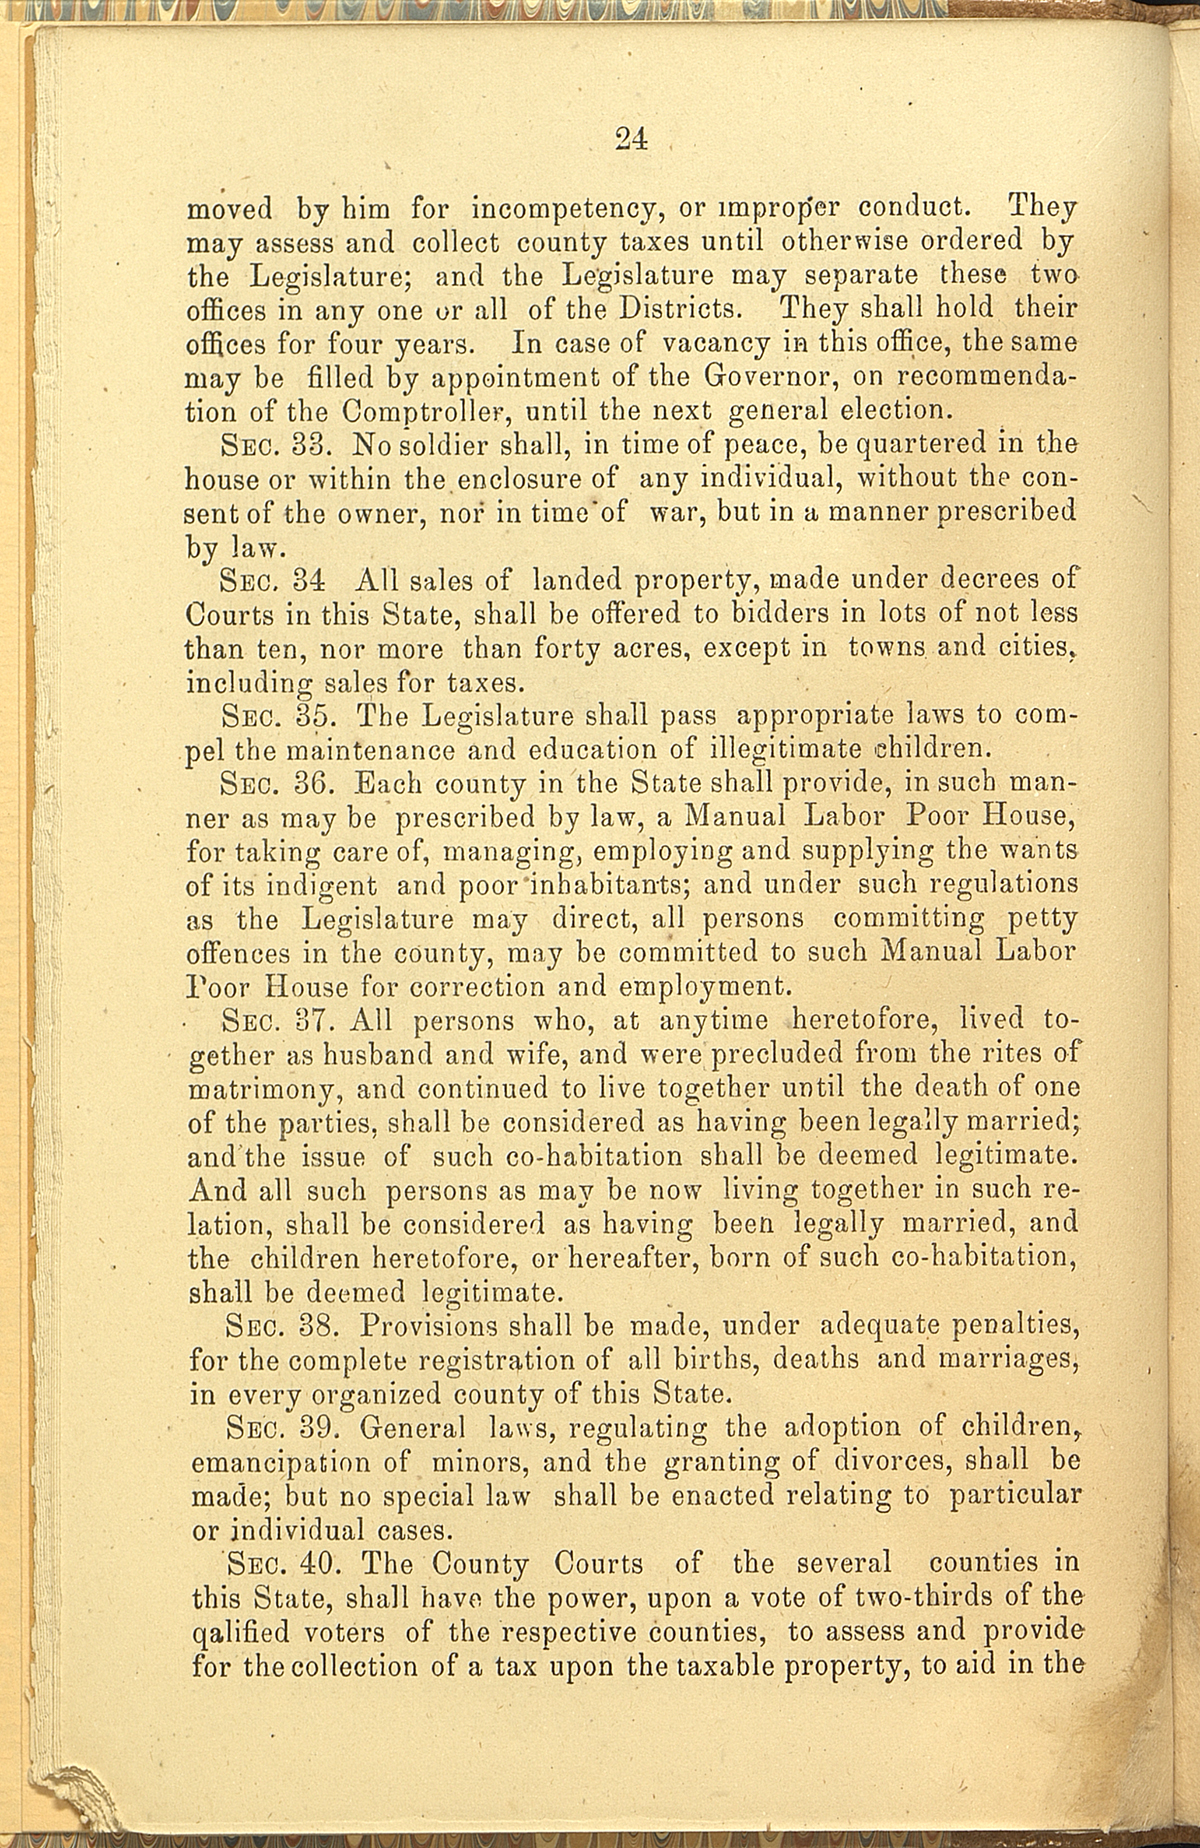 Article VII, Sections 32-40